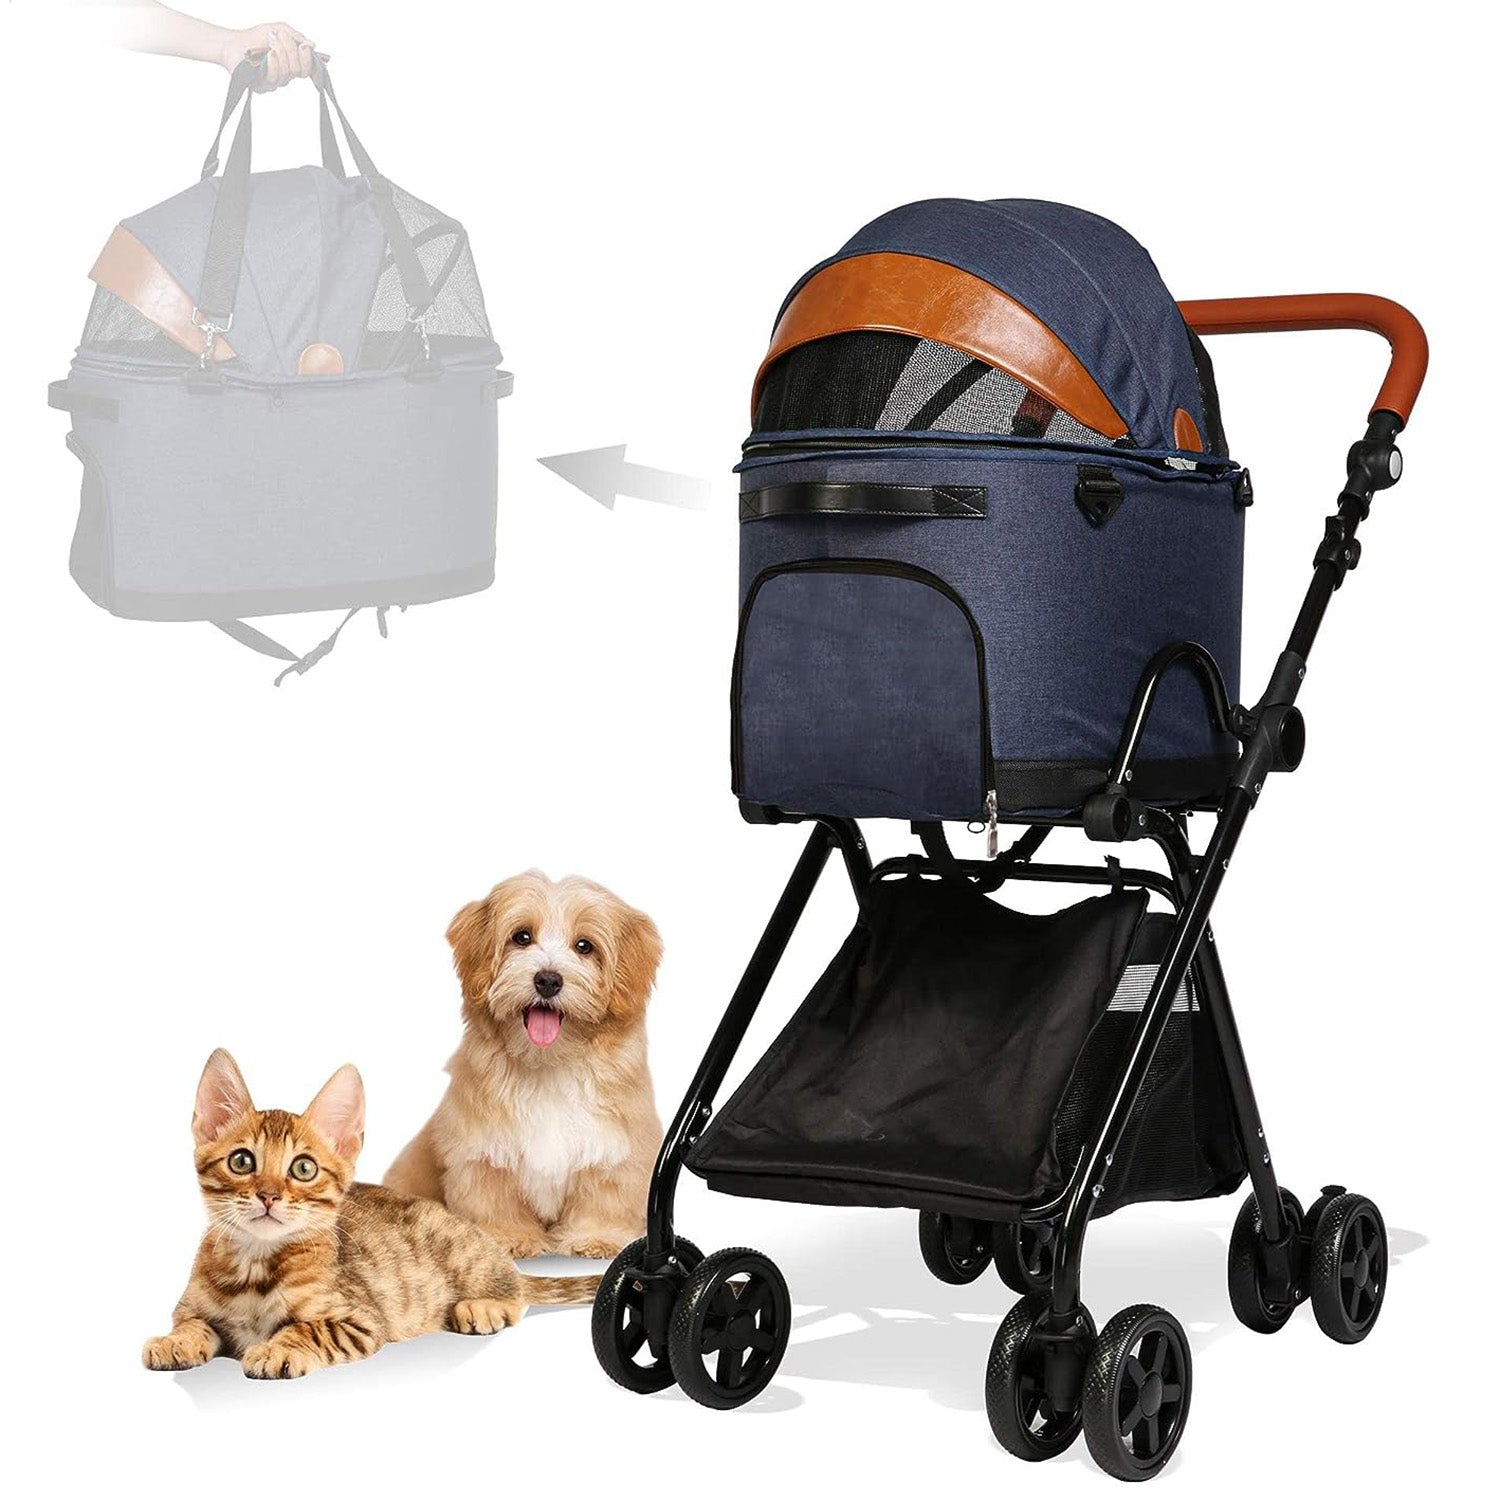 2 in 1 Dog Stroller Pet Carrier with Detachable Carrier and Adjustable Handle, Blue